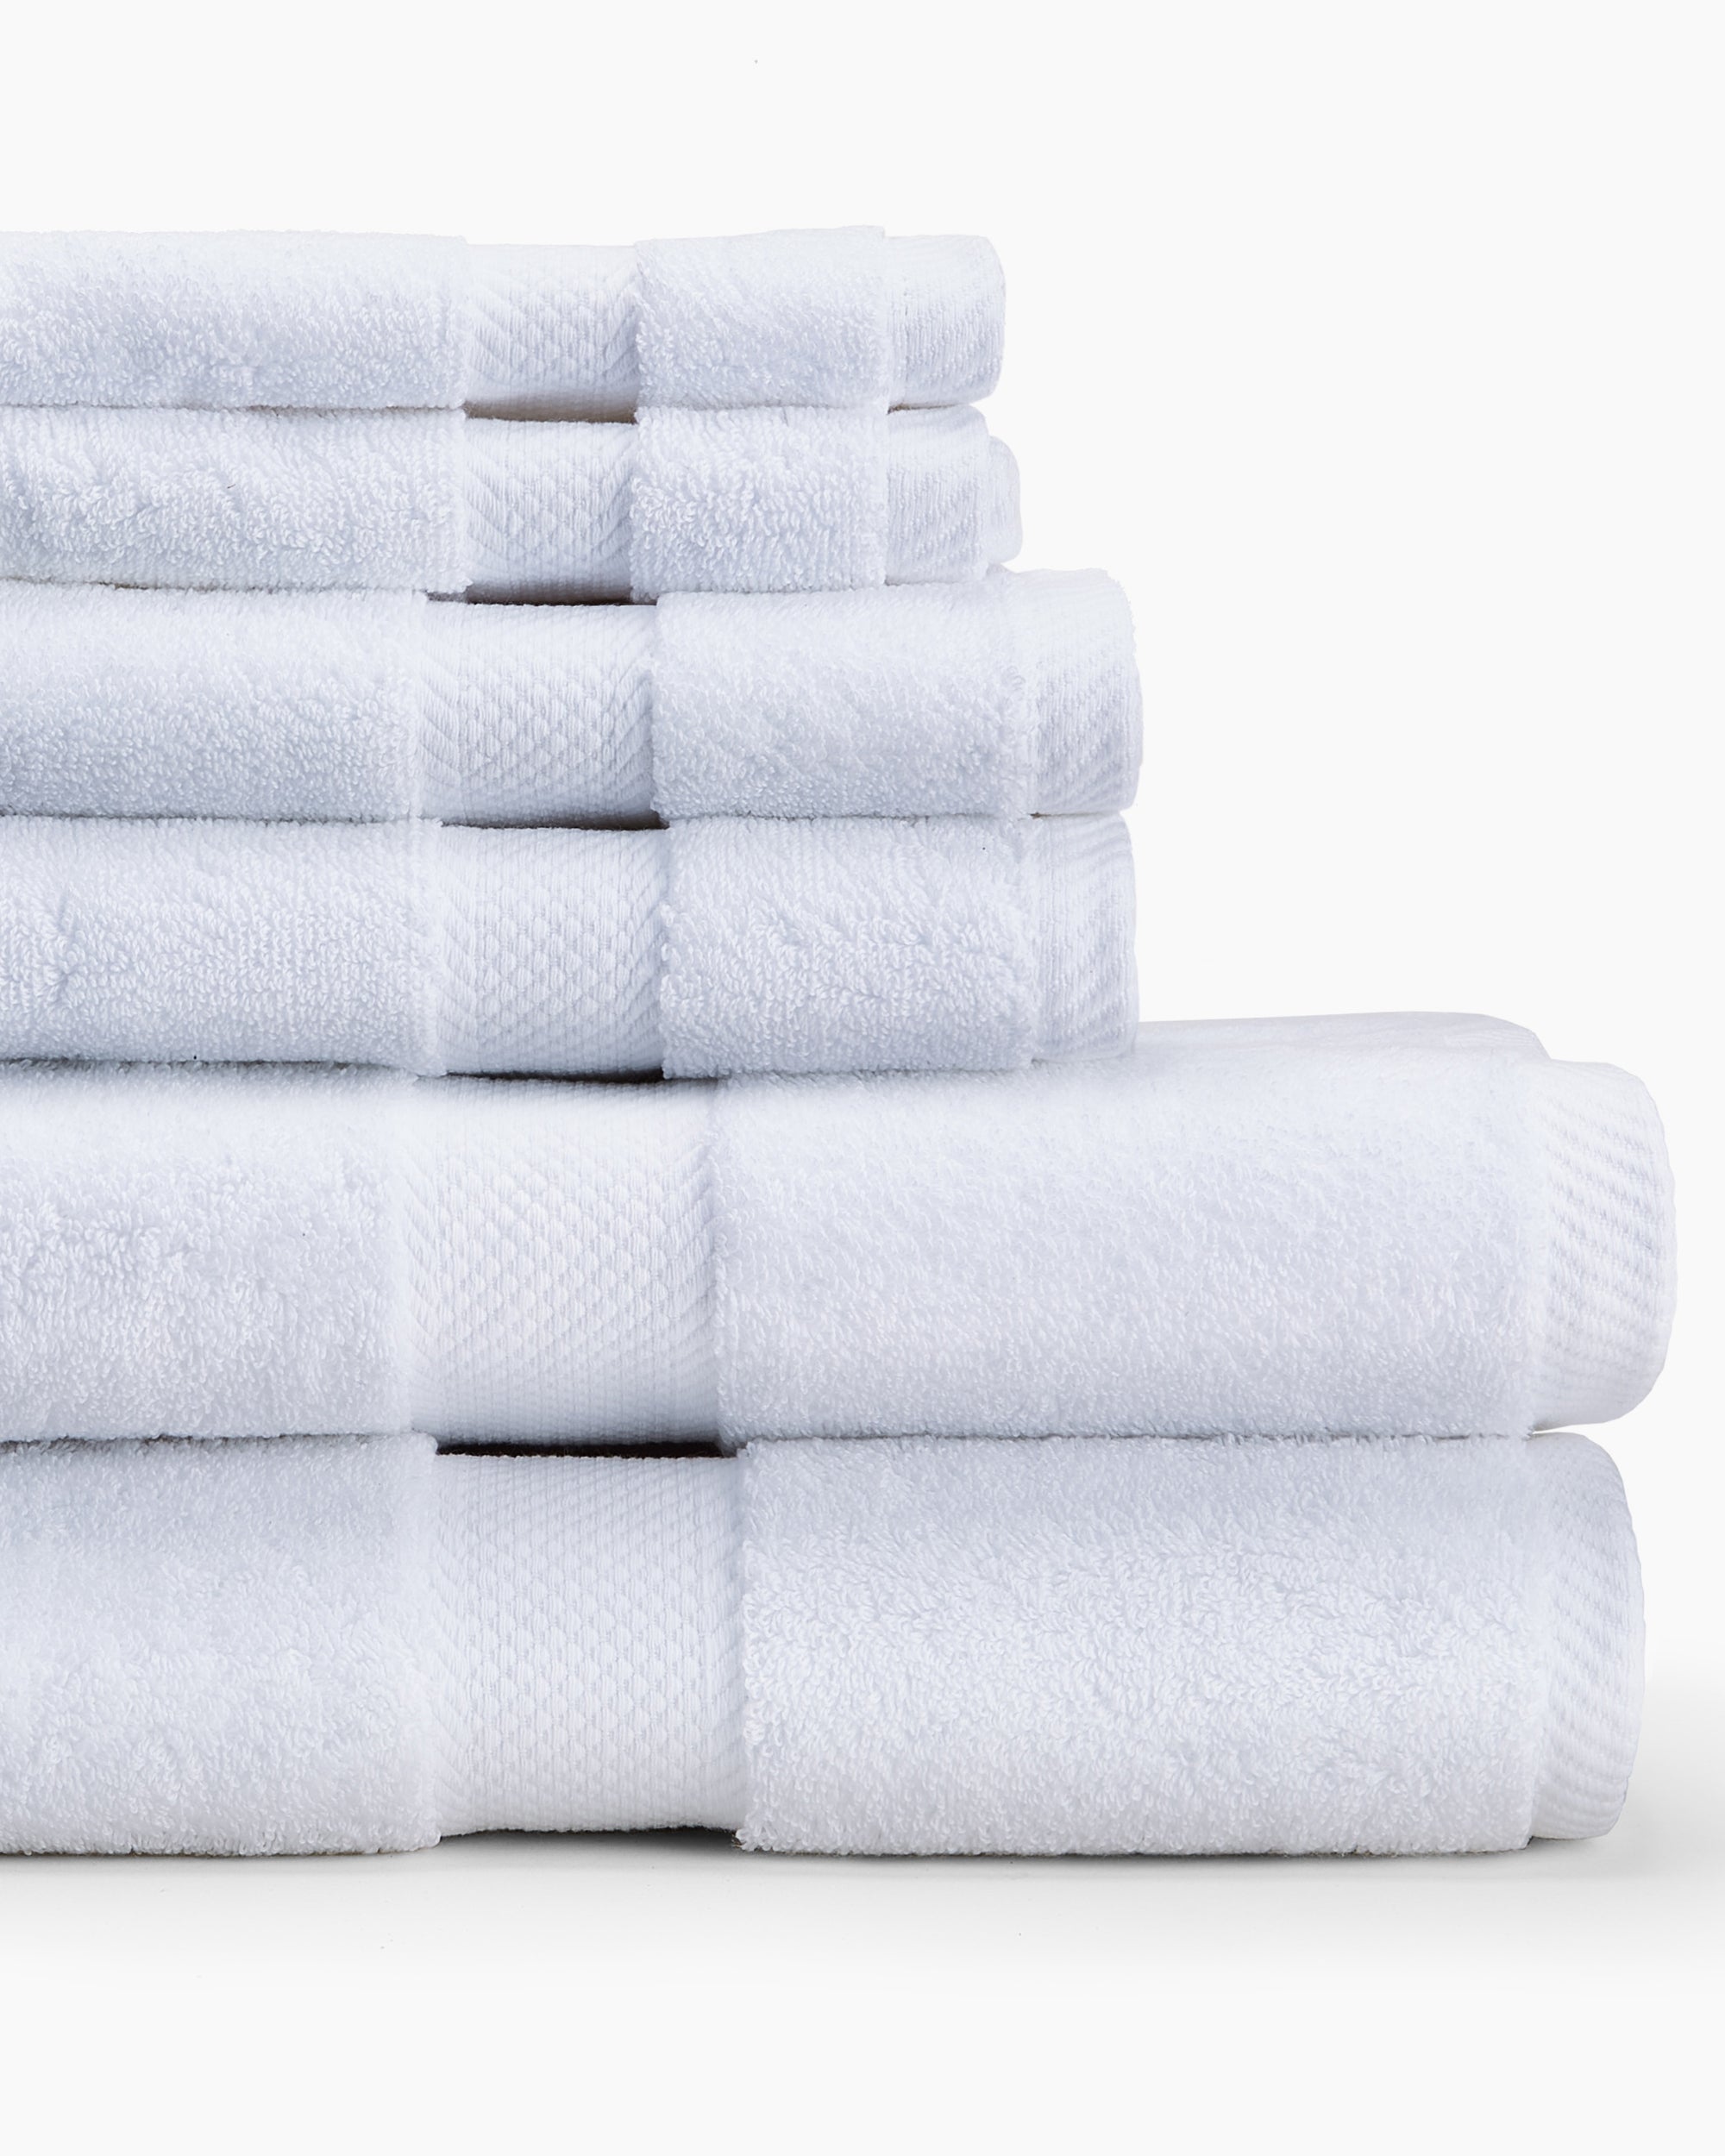 http://authenticity50.com/cdn/shop/products/super-soft-absorbent-plush-made-in-the-usa-cotton-bath-towels.jpg?v=1674154920&width=2048